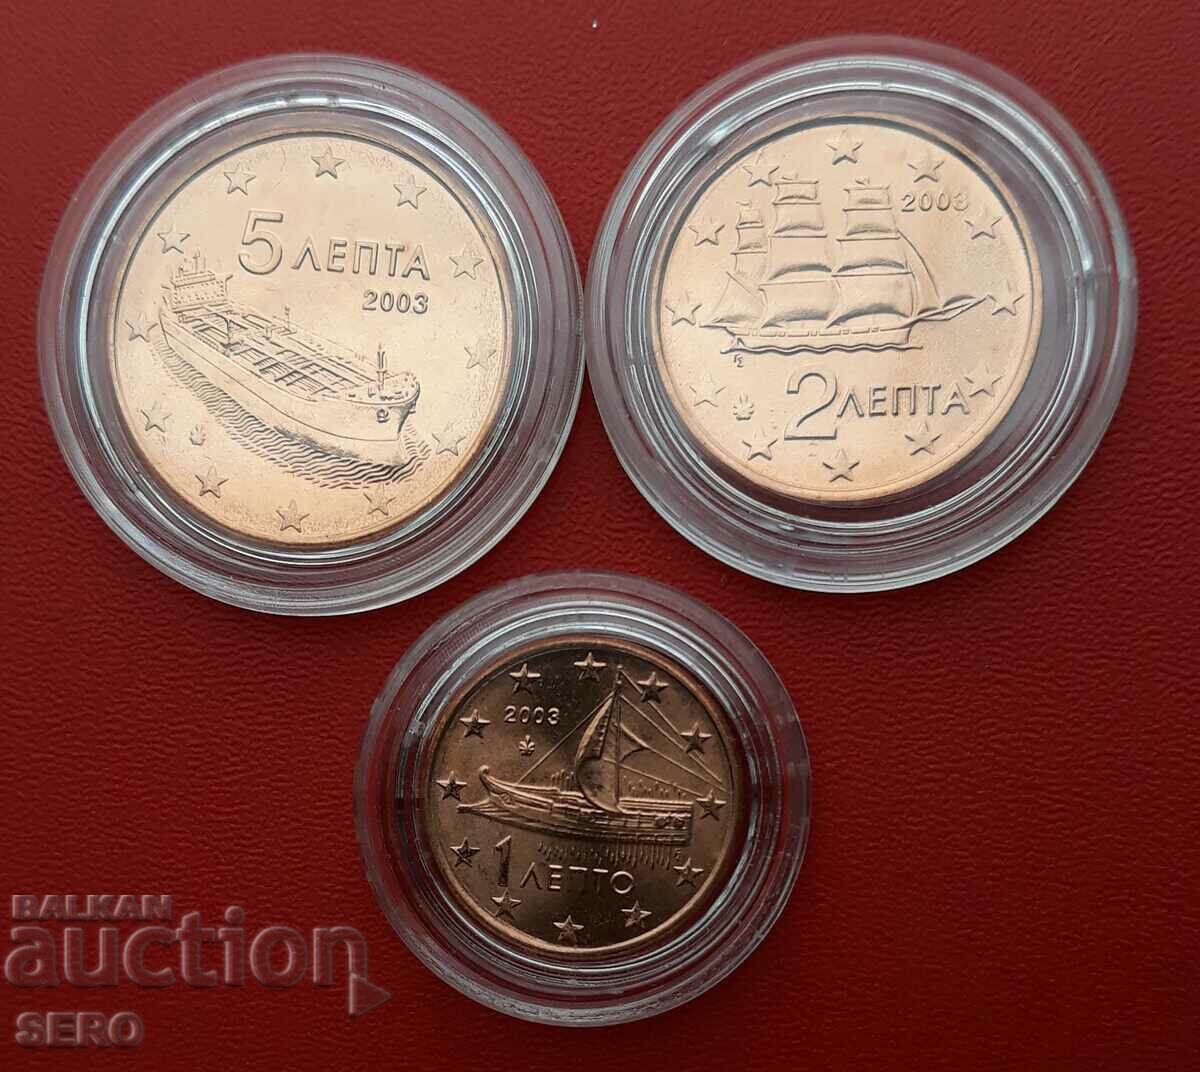 Greece-lot 3 euro coins 2003 in capsules